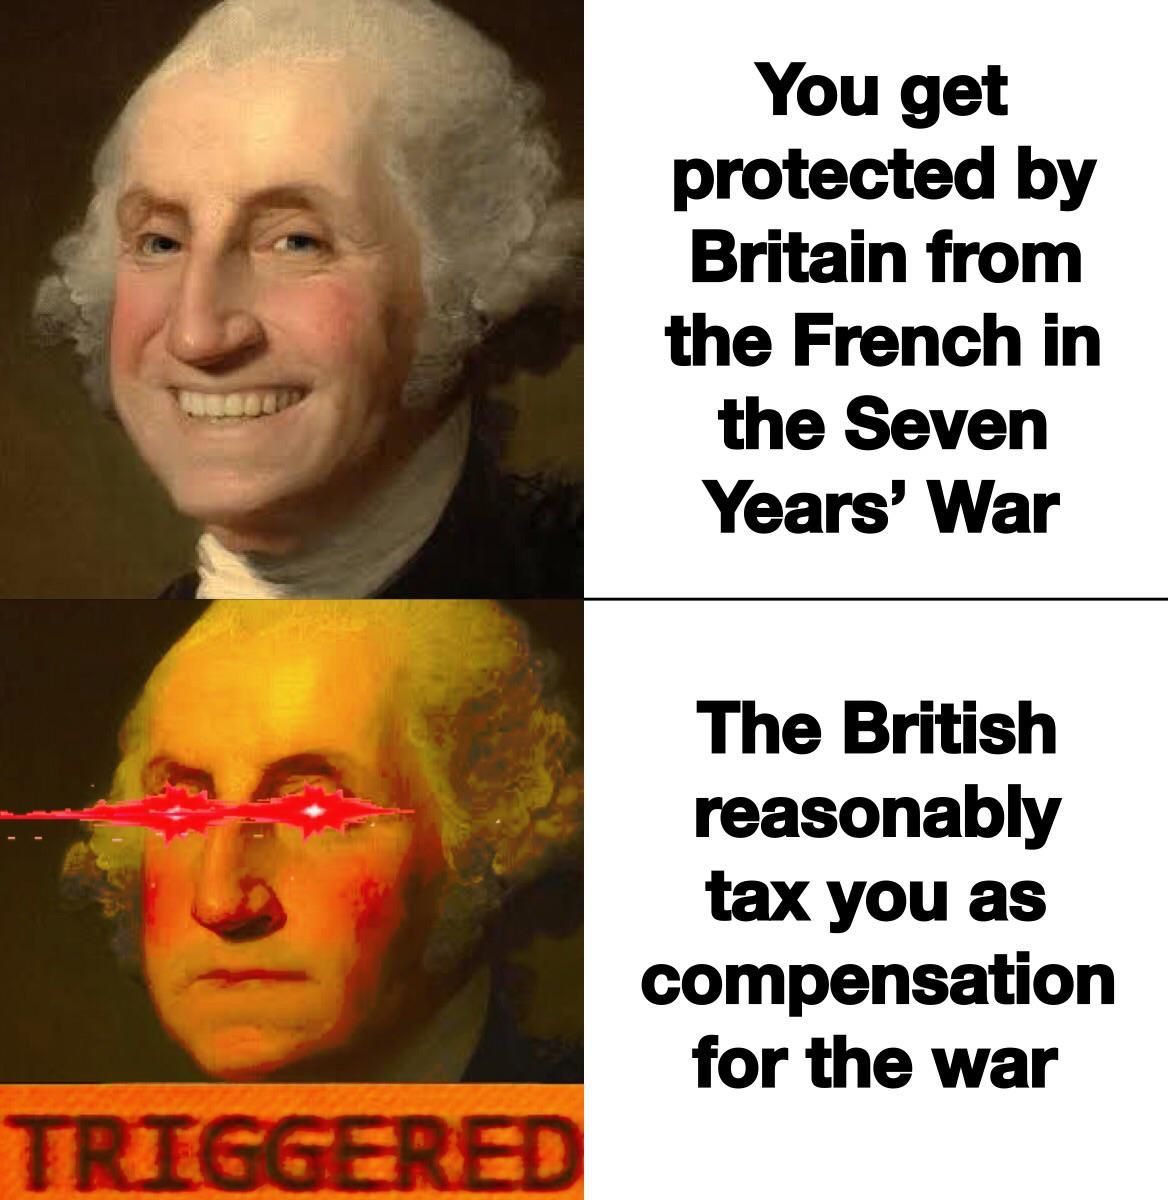 No taxation without representation?